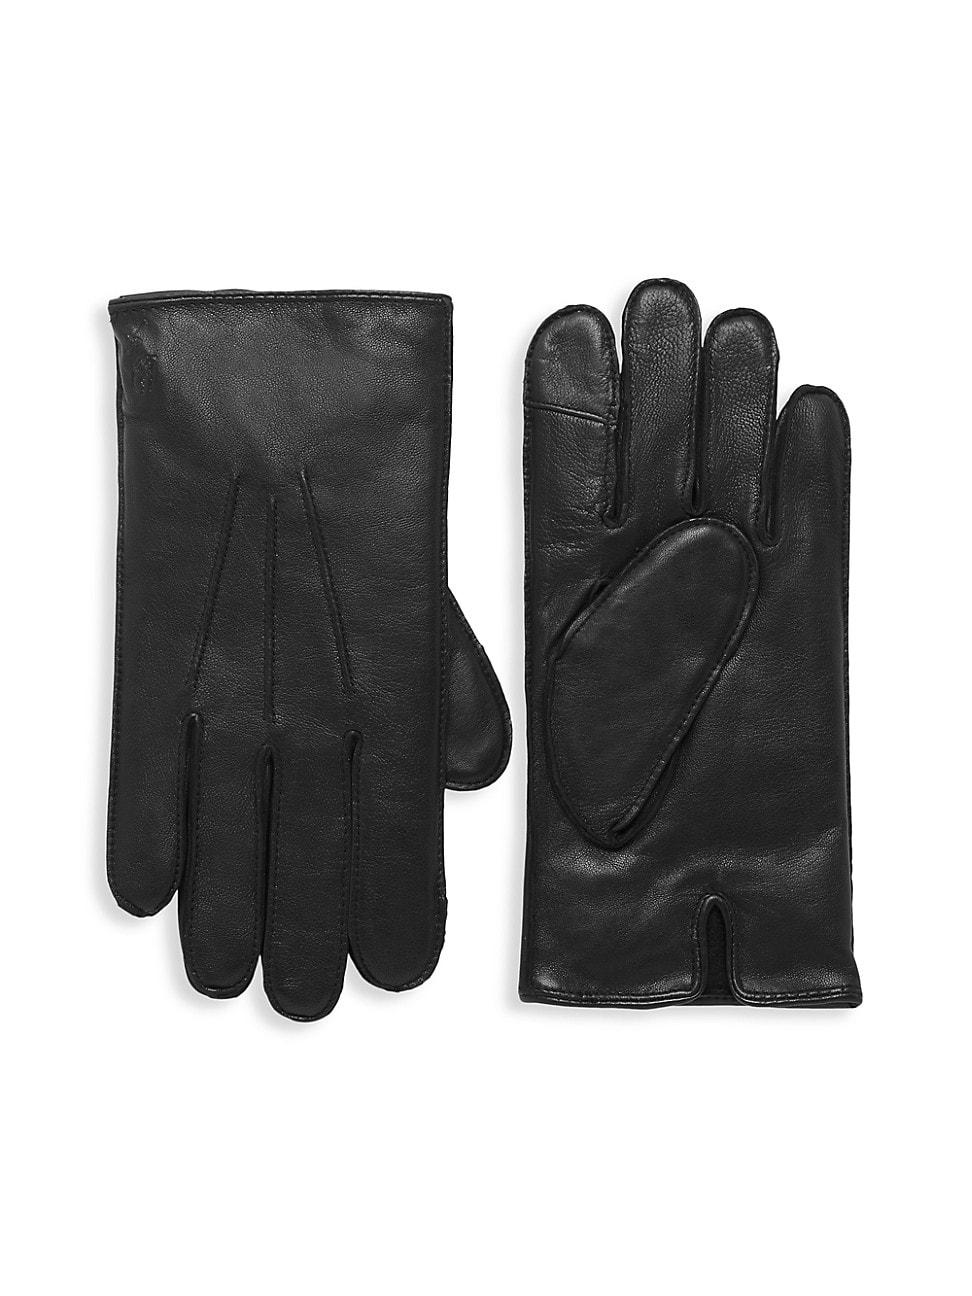 Polo Ralph Lauren Water Repellent Nappa Leather Gloves in rl Black (Black)  for Men - Save 62% - Lyst